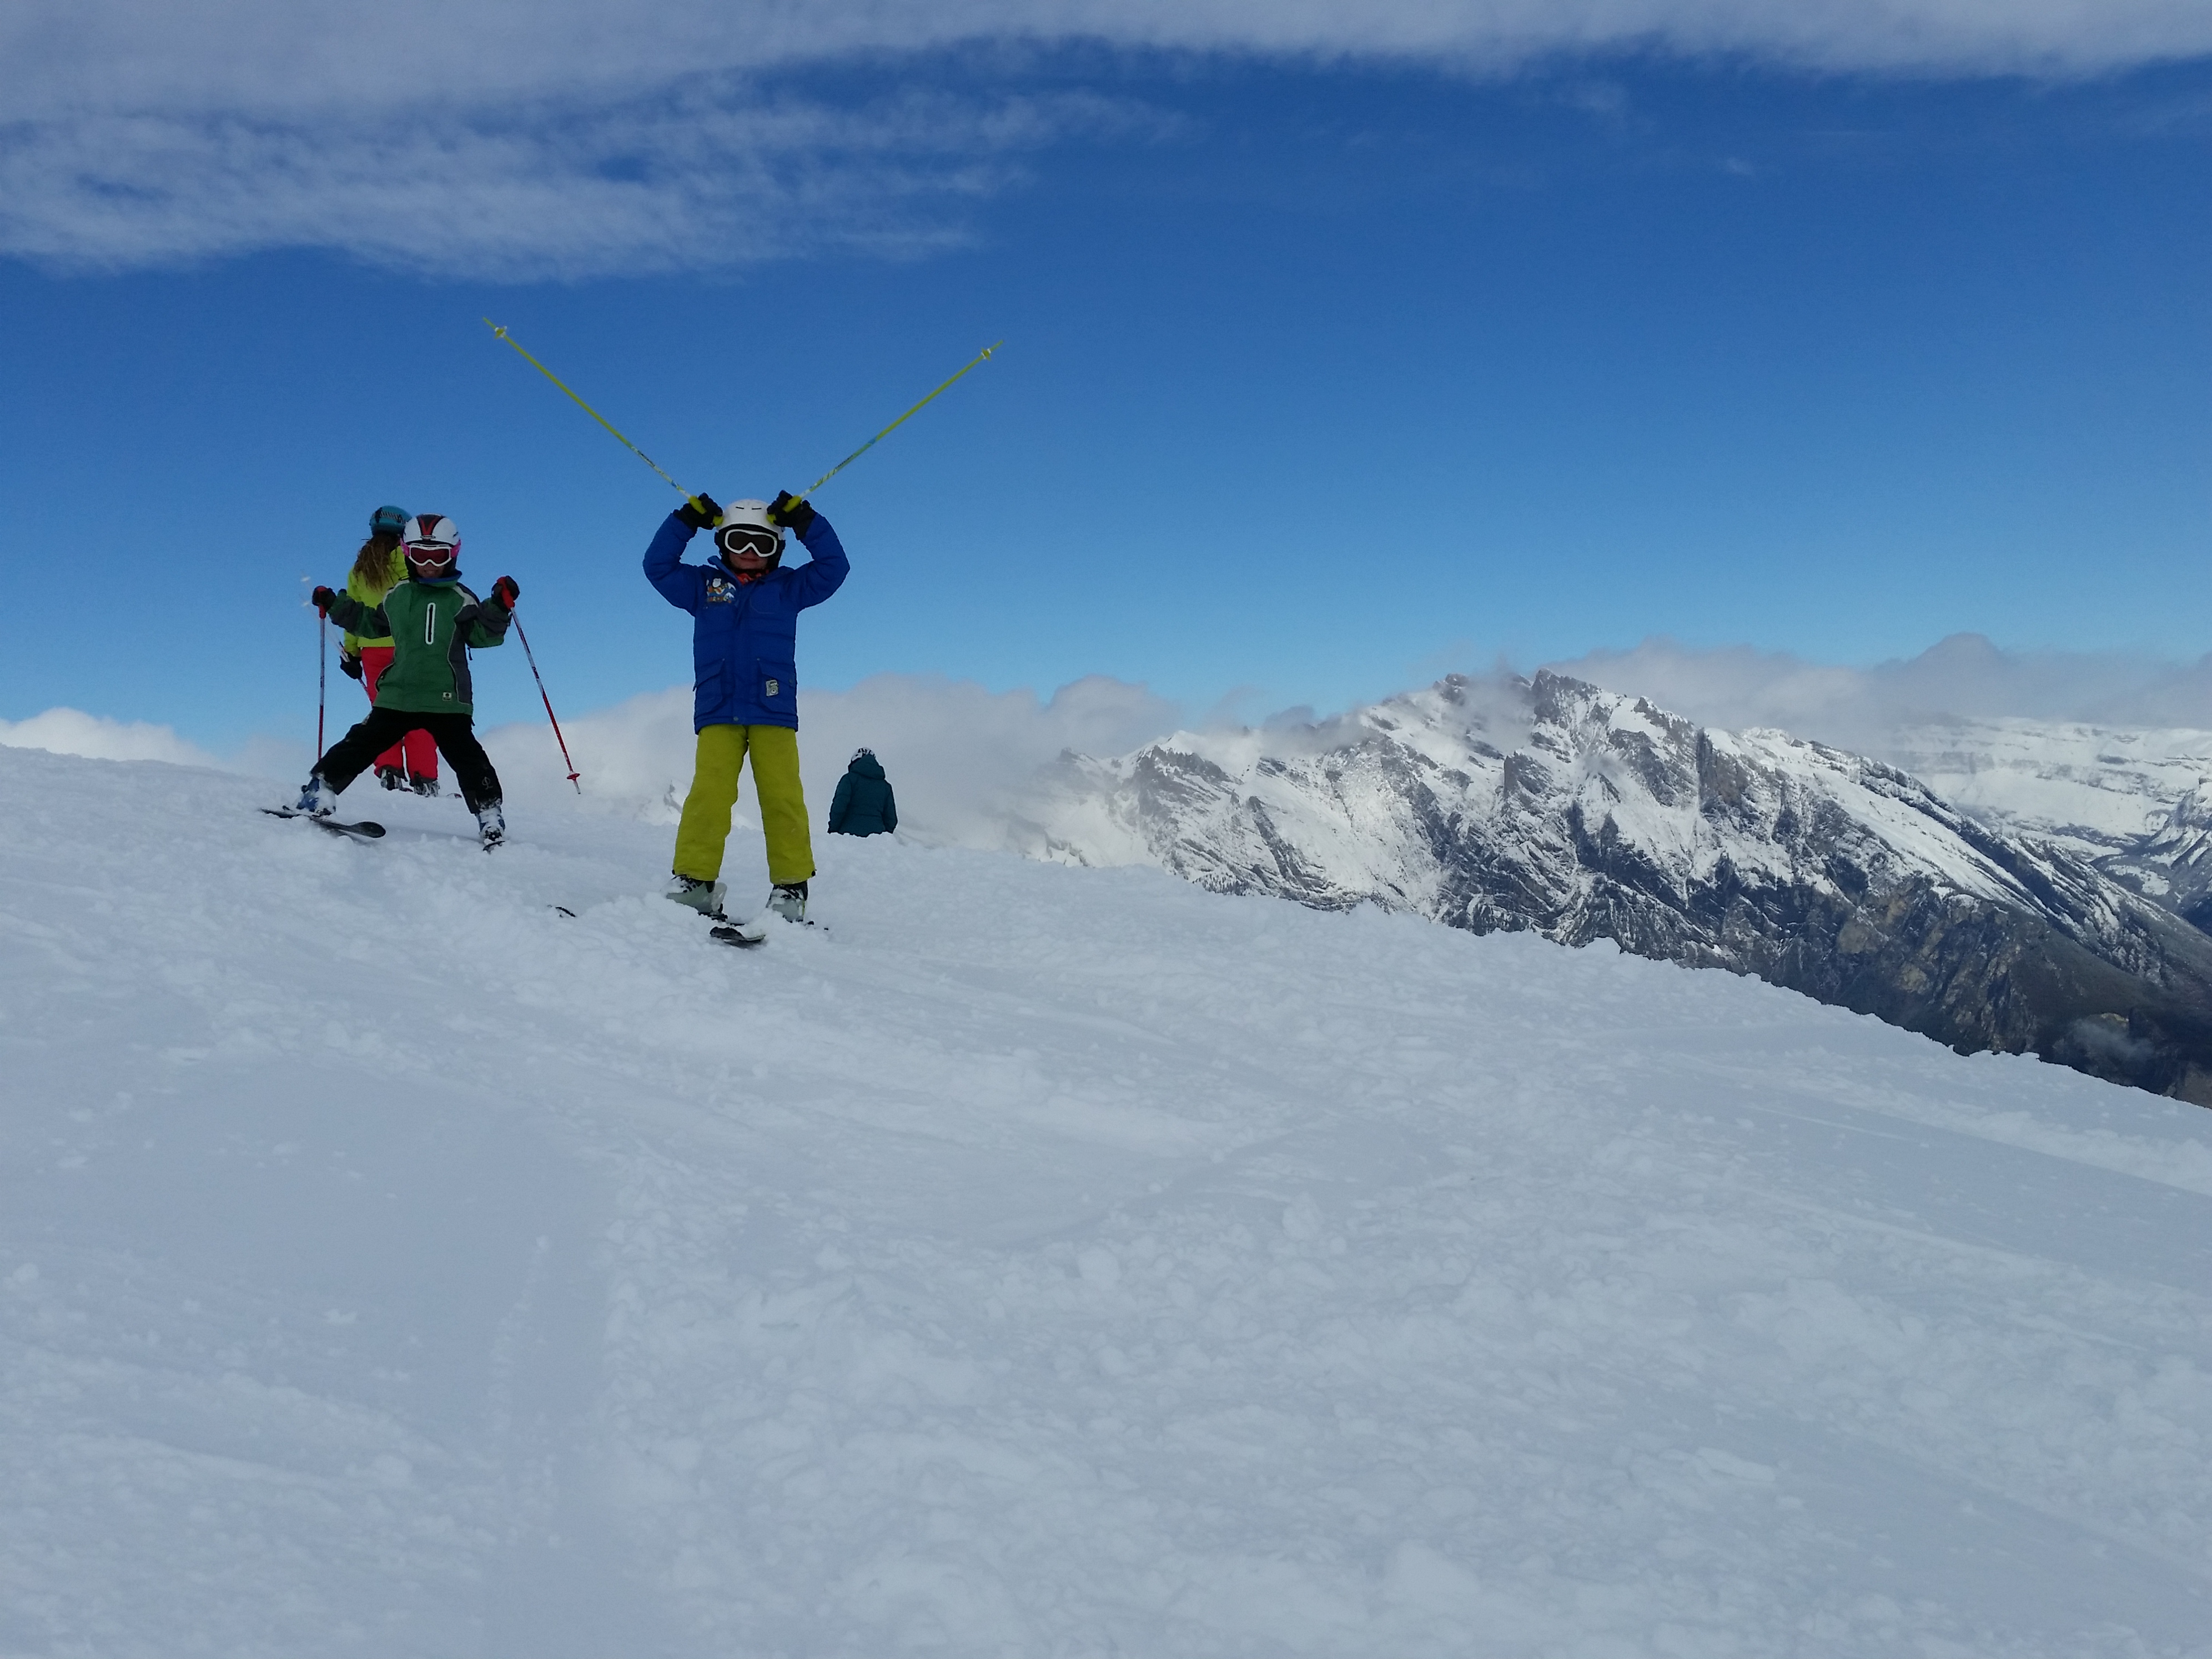 The kids make the most of the fresh snowfall and magnificent blue skies, La Tzoumaz